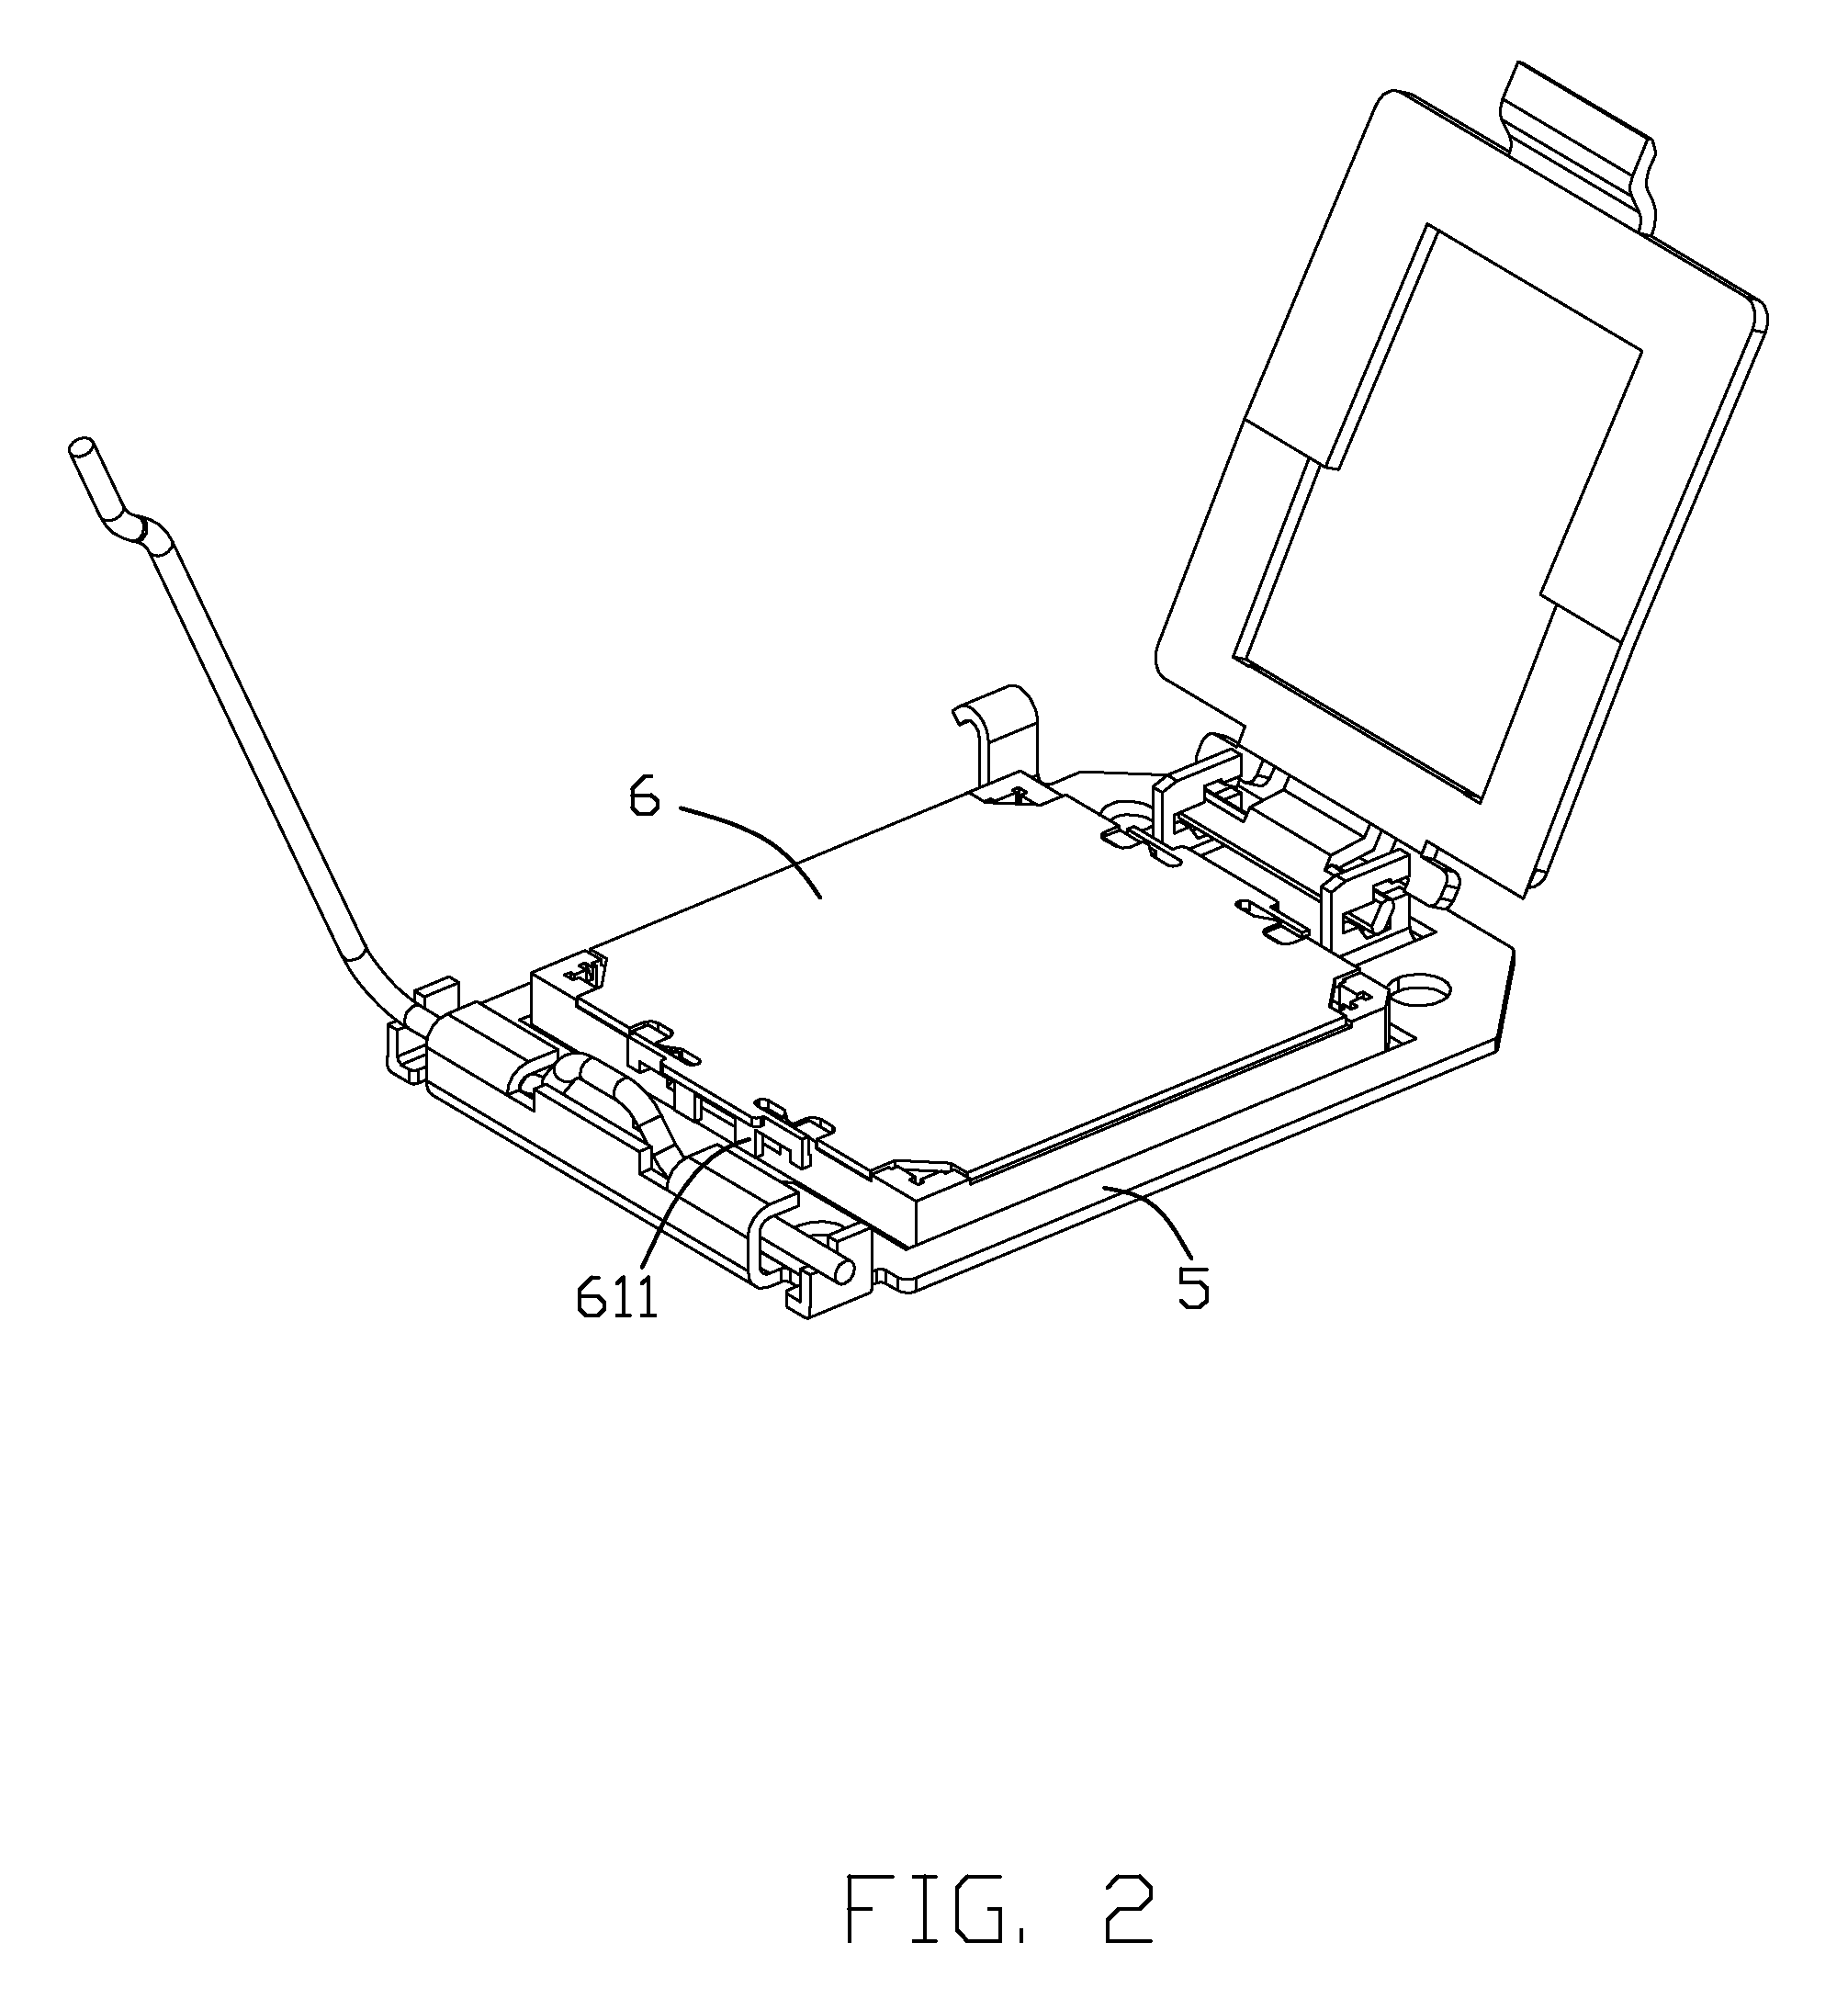 Electrical connector assembly having pick-up cap